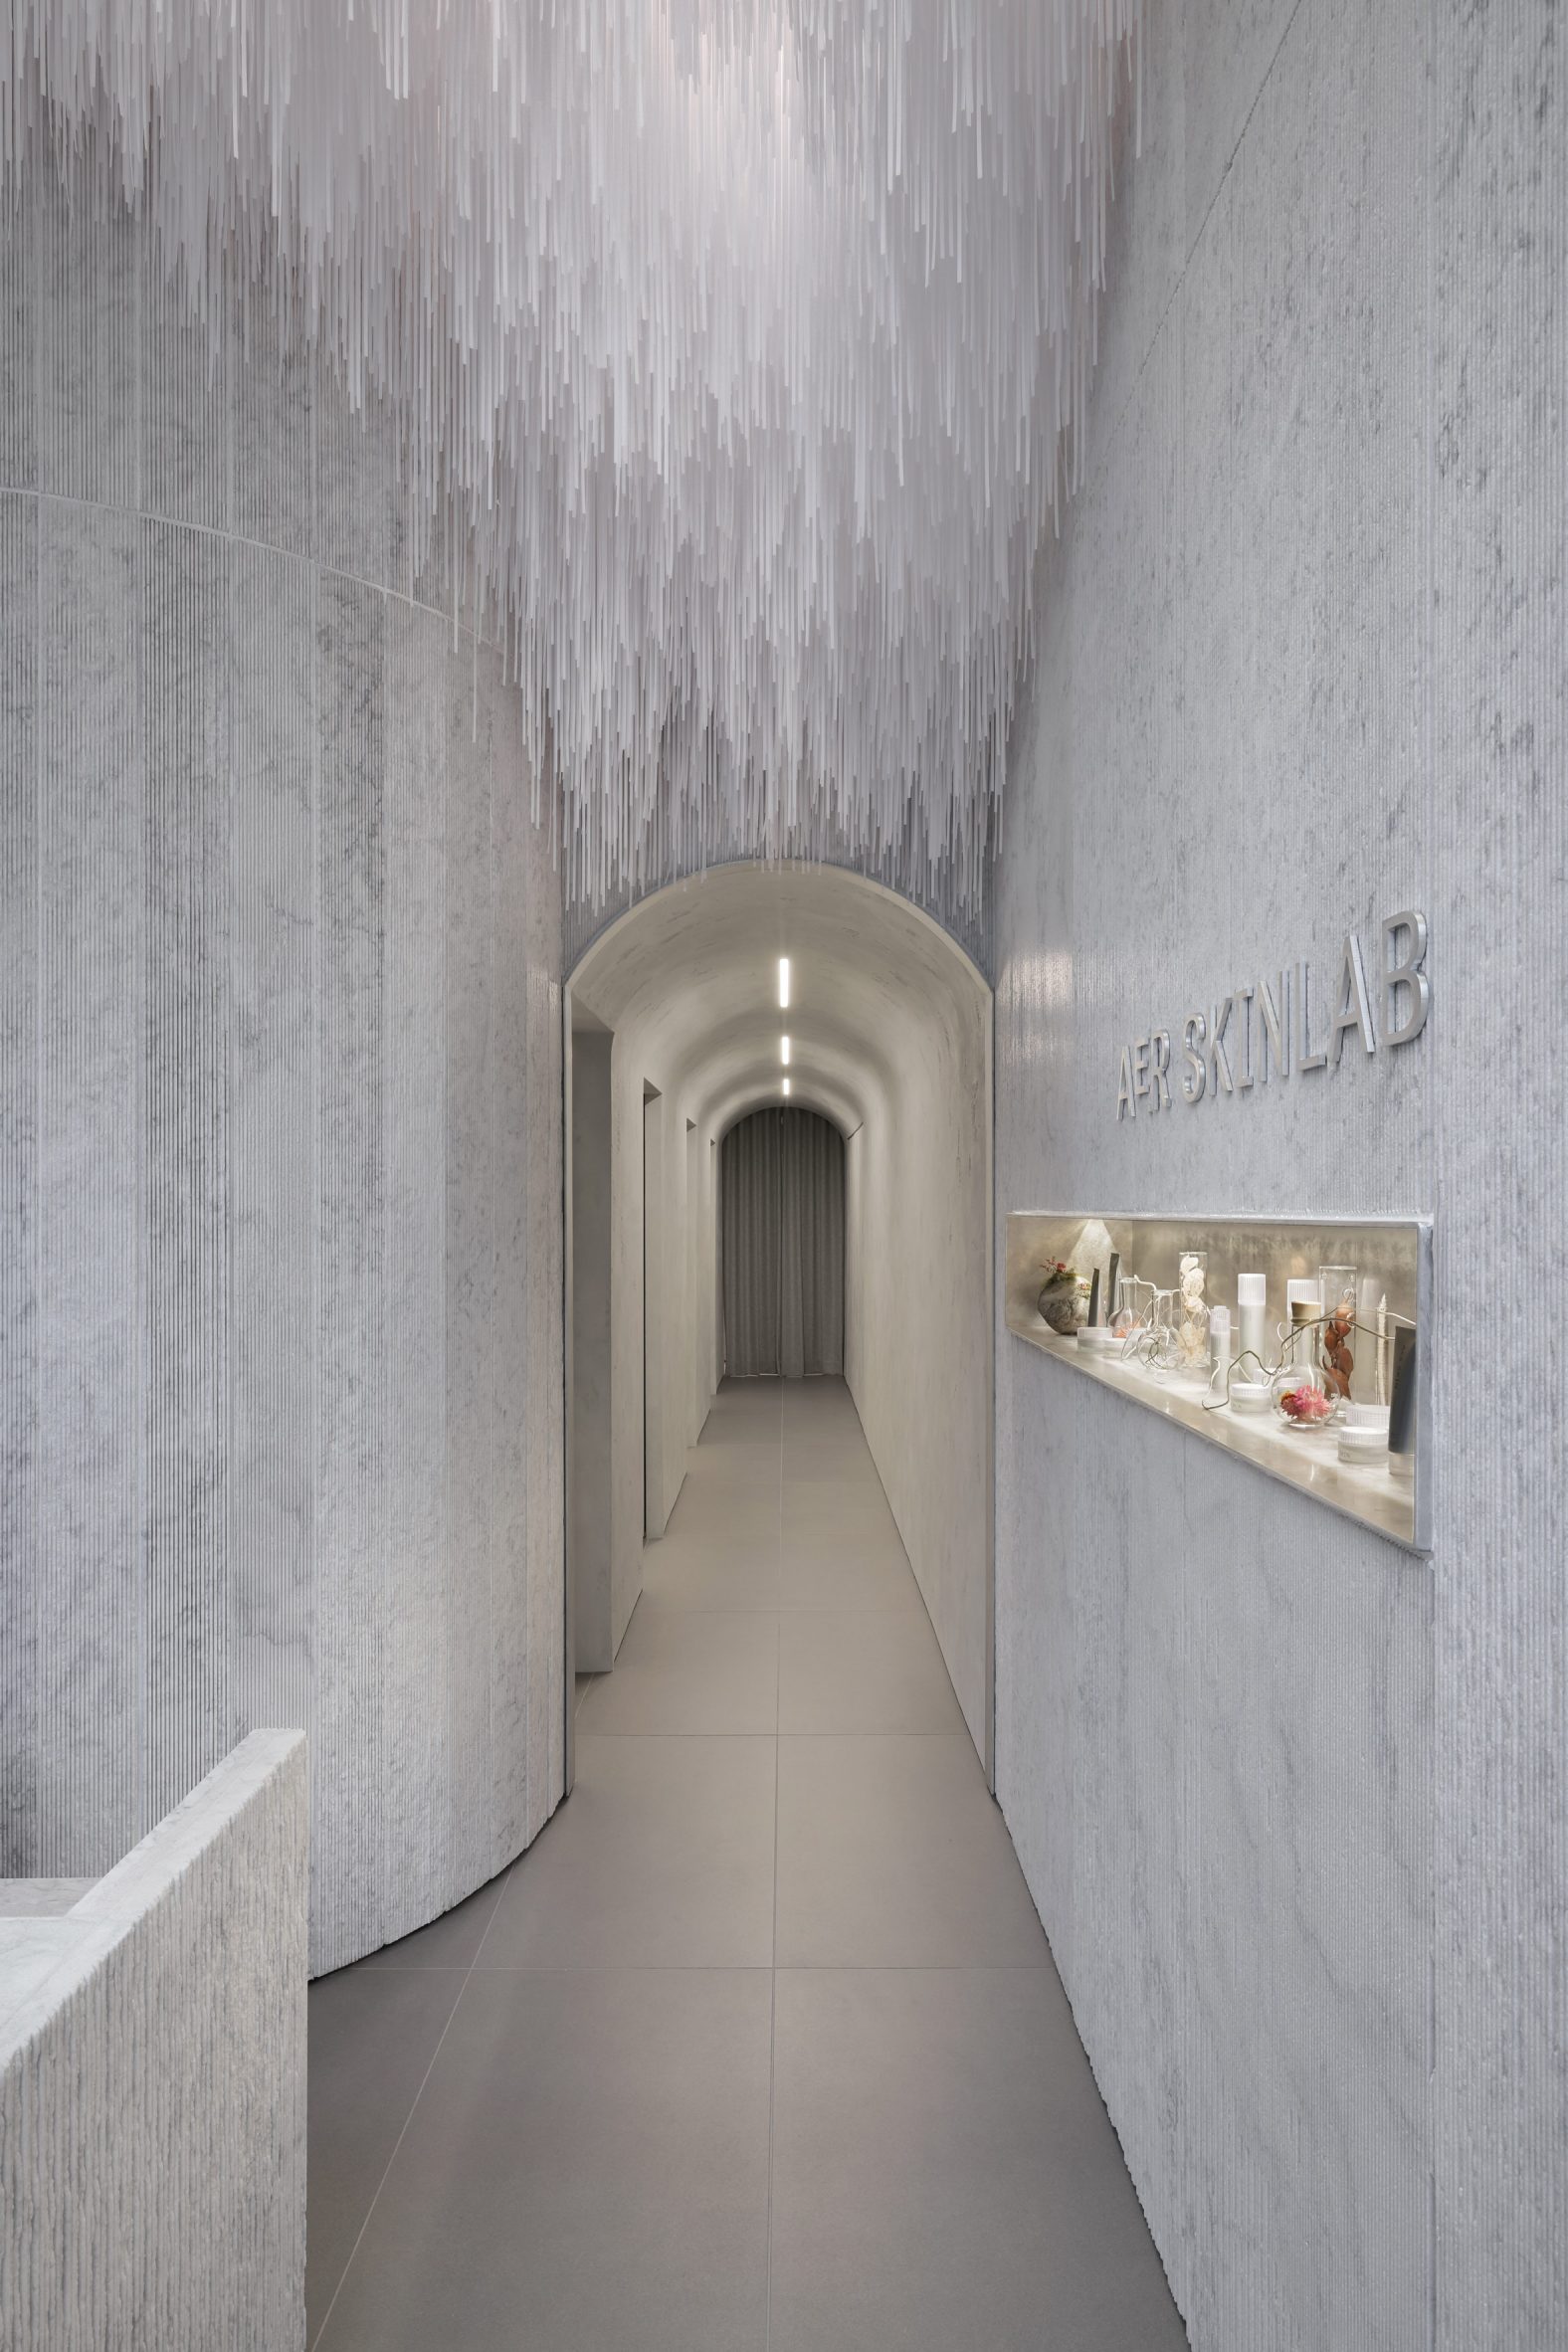 Marble-lined hallway of Vancouver skincare clinic designed by Leckie Studio